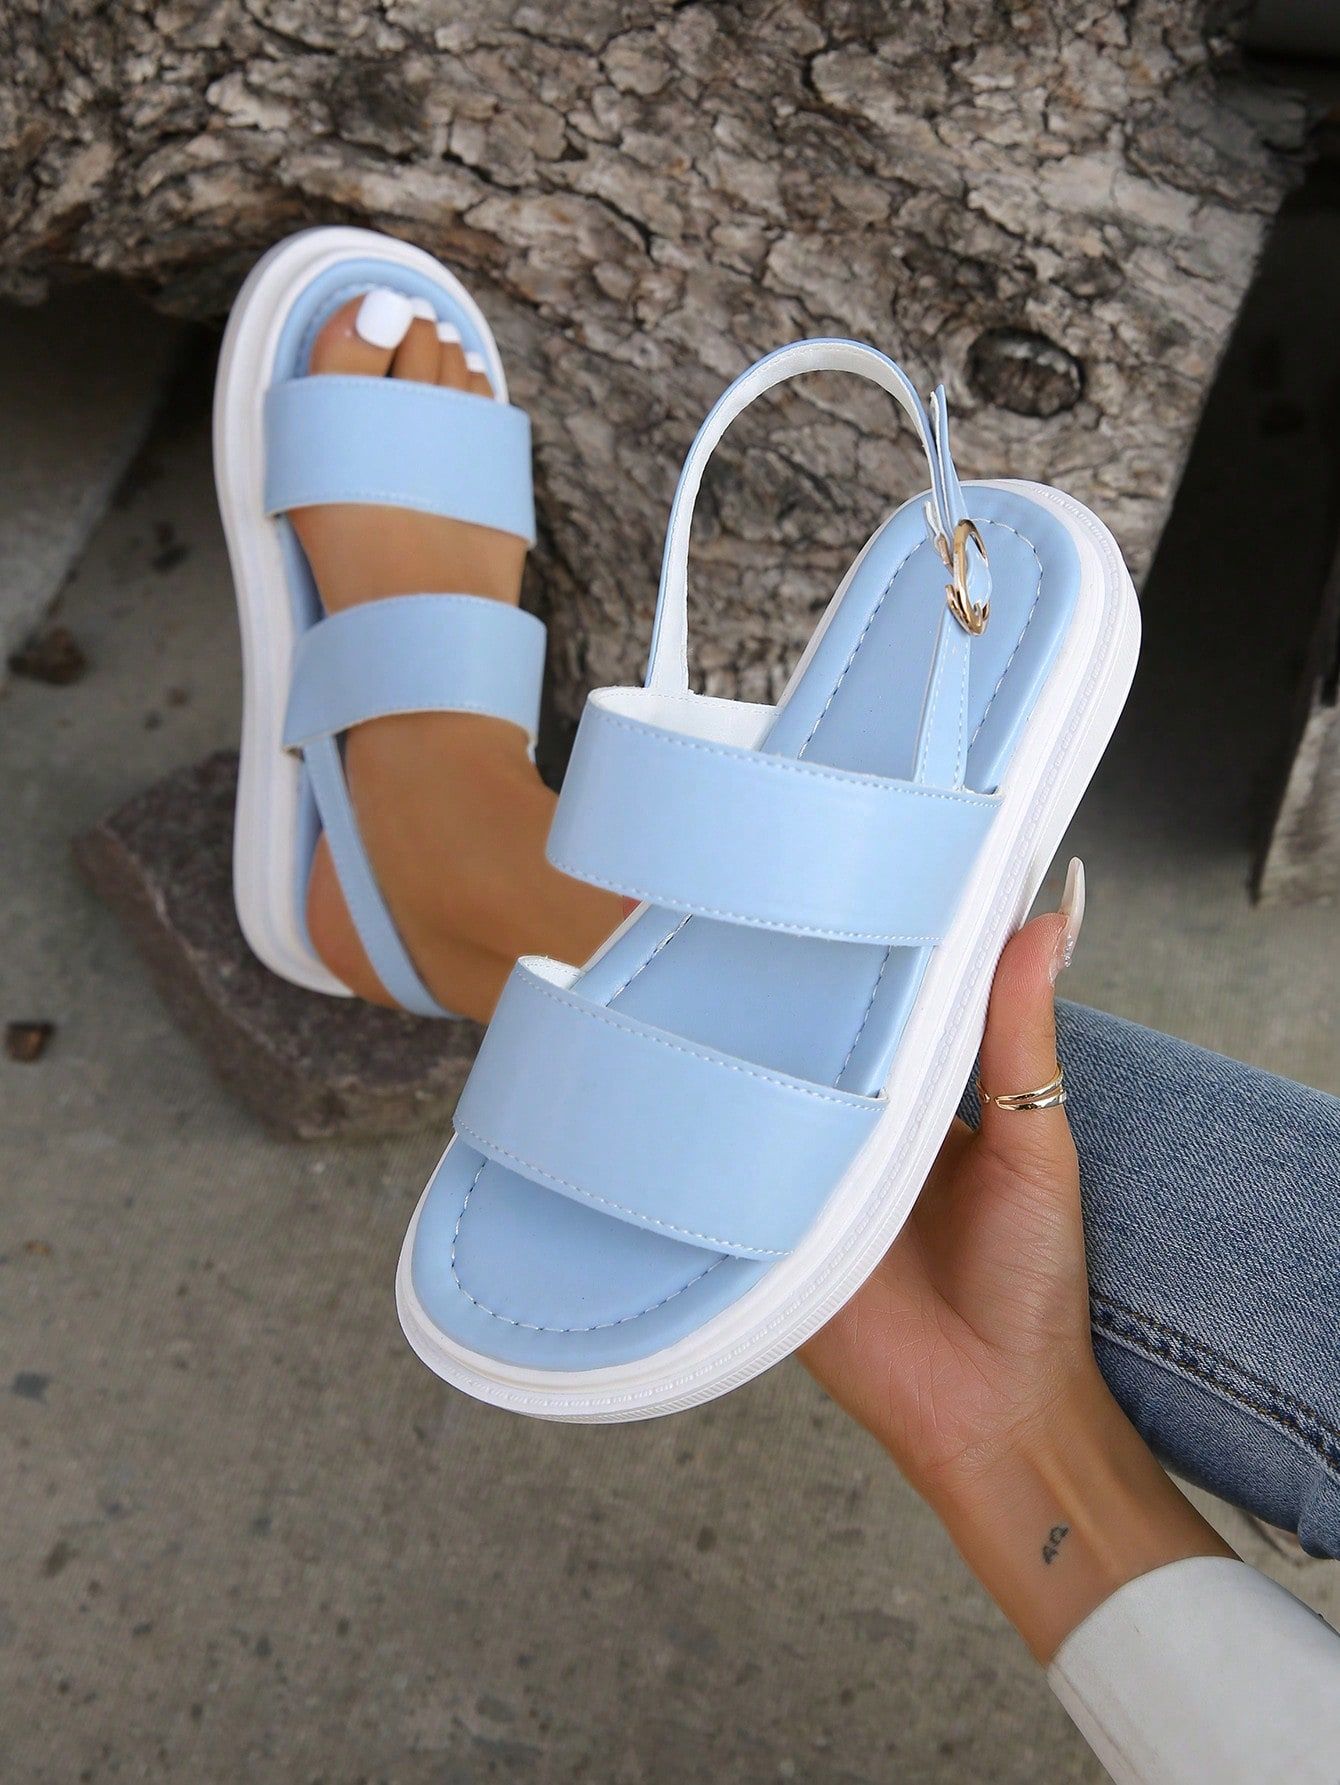 How to Wear Blue Sandals: Top 15 Stylish & Casual Outfit Ideas for Ladies